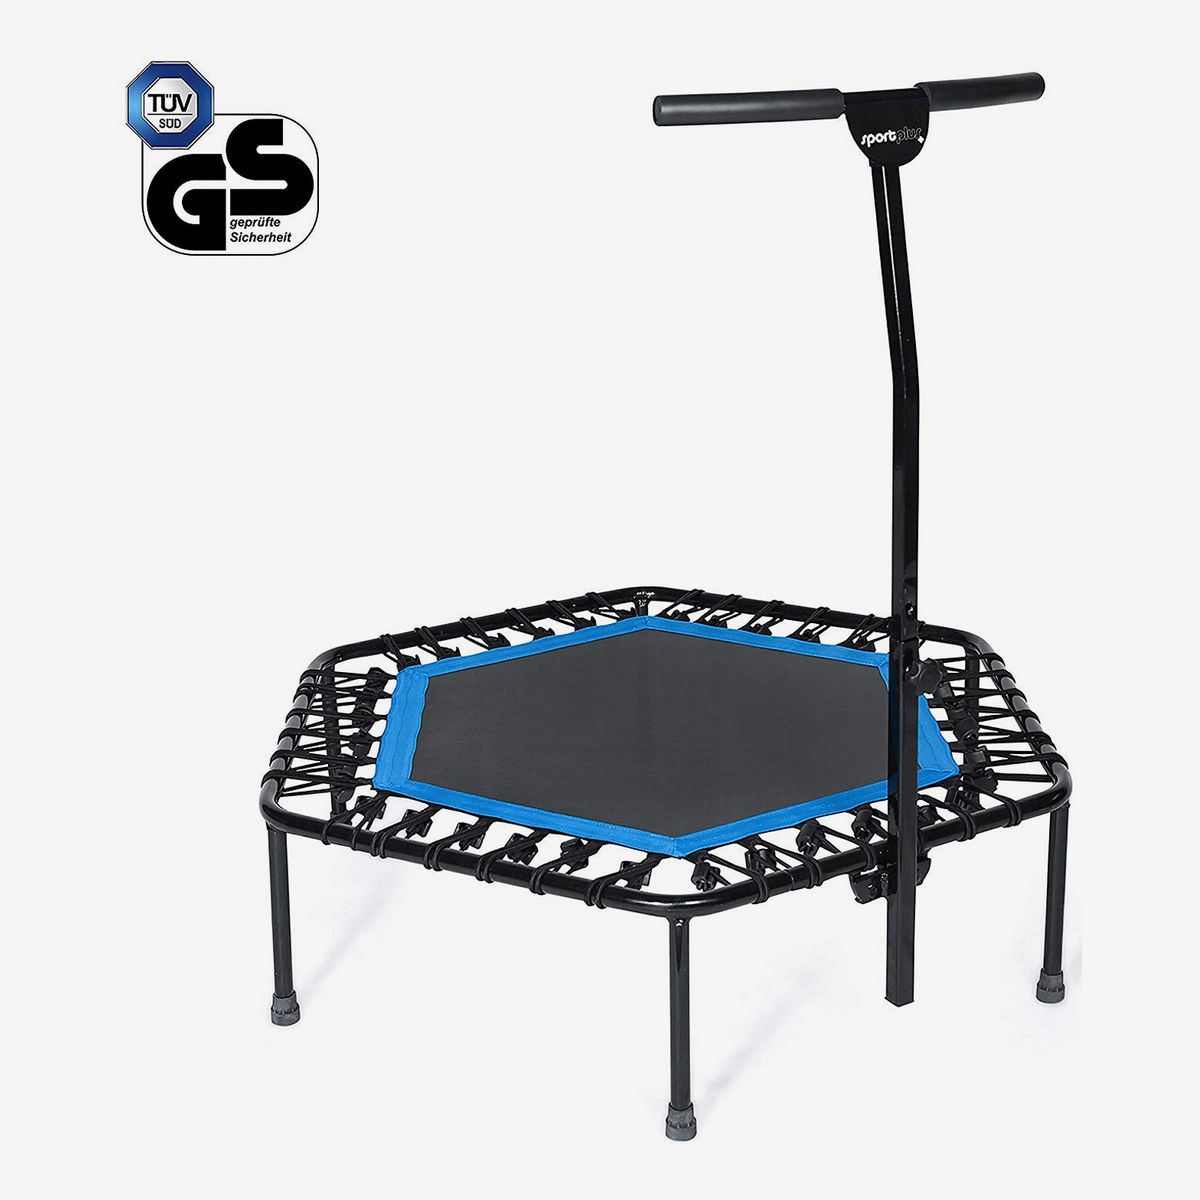 Indoor Bouncer With Handrail 48 Inch Black WestWood Foldable Rebounder Mini Trampoline For Fitness Weight loss Cardio Exercise Home Gym Equipment 